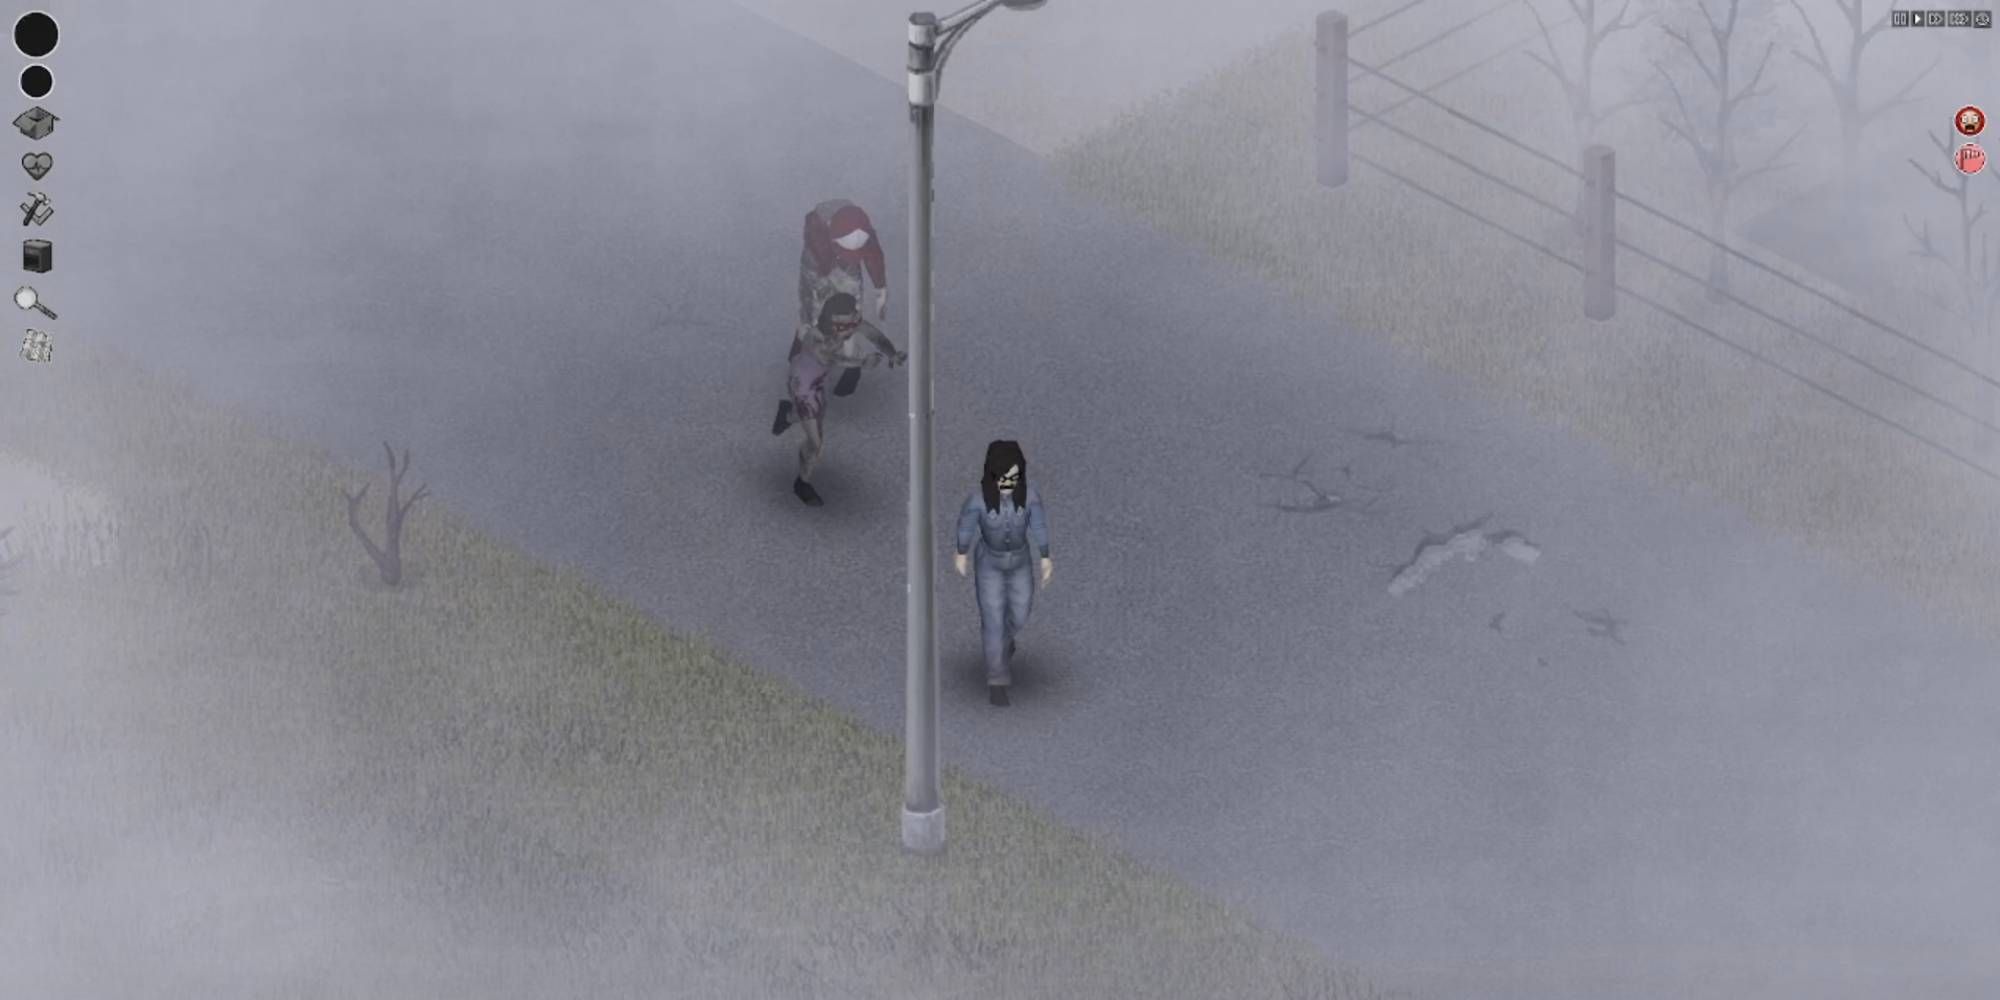 A character wearing glasses with long hair being chased through fog